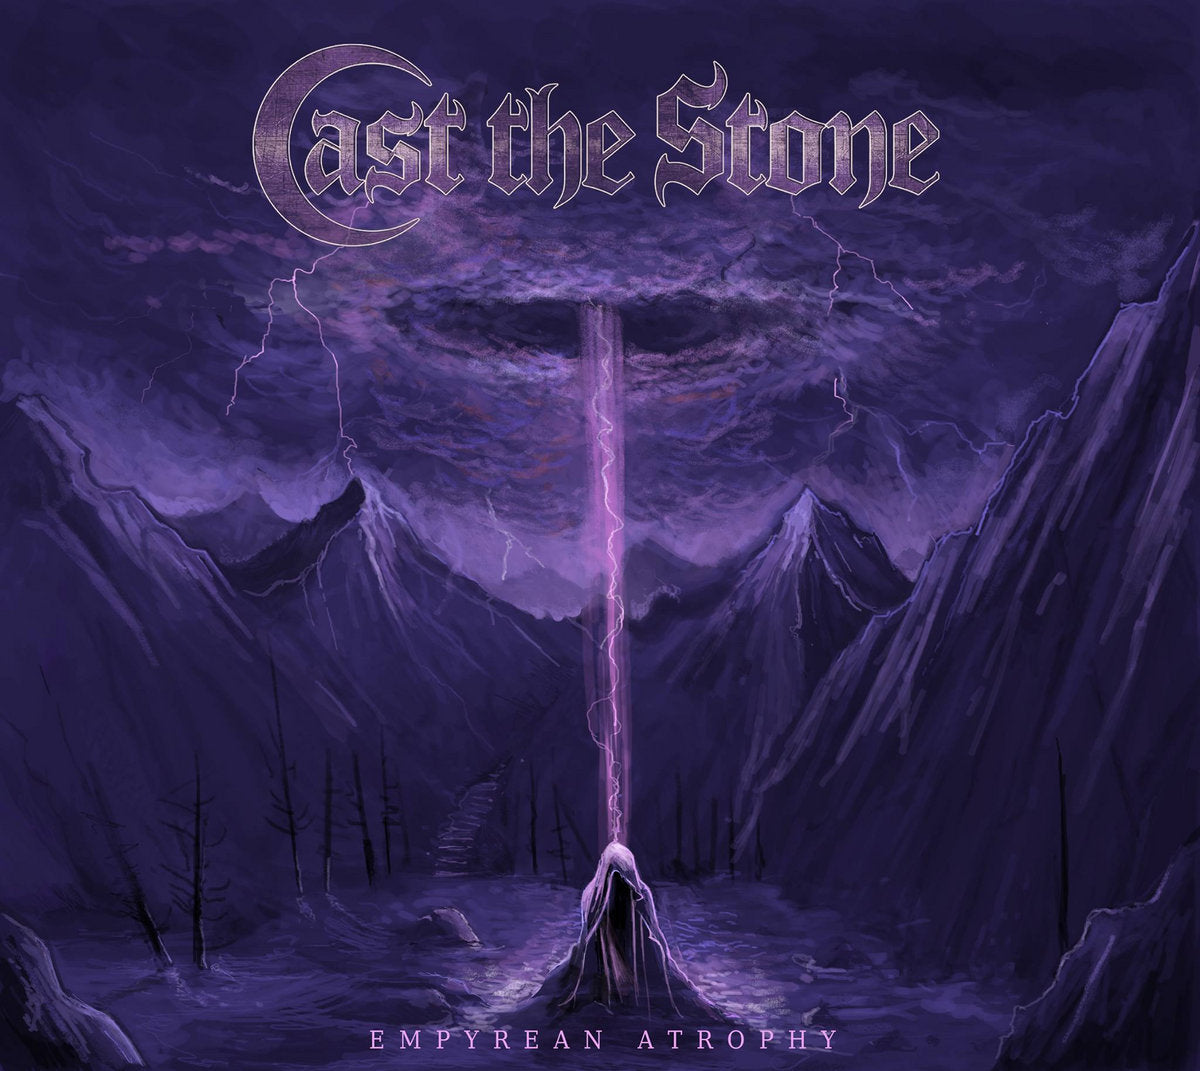 Cast The Stone - Empyrean Atrophy Free US Shipping - Transcending Records